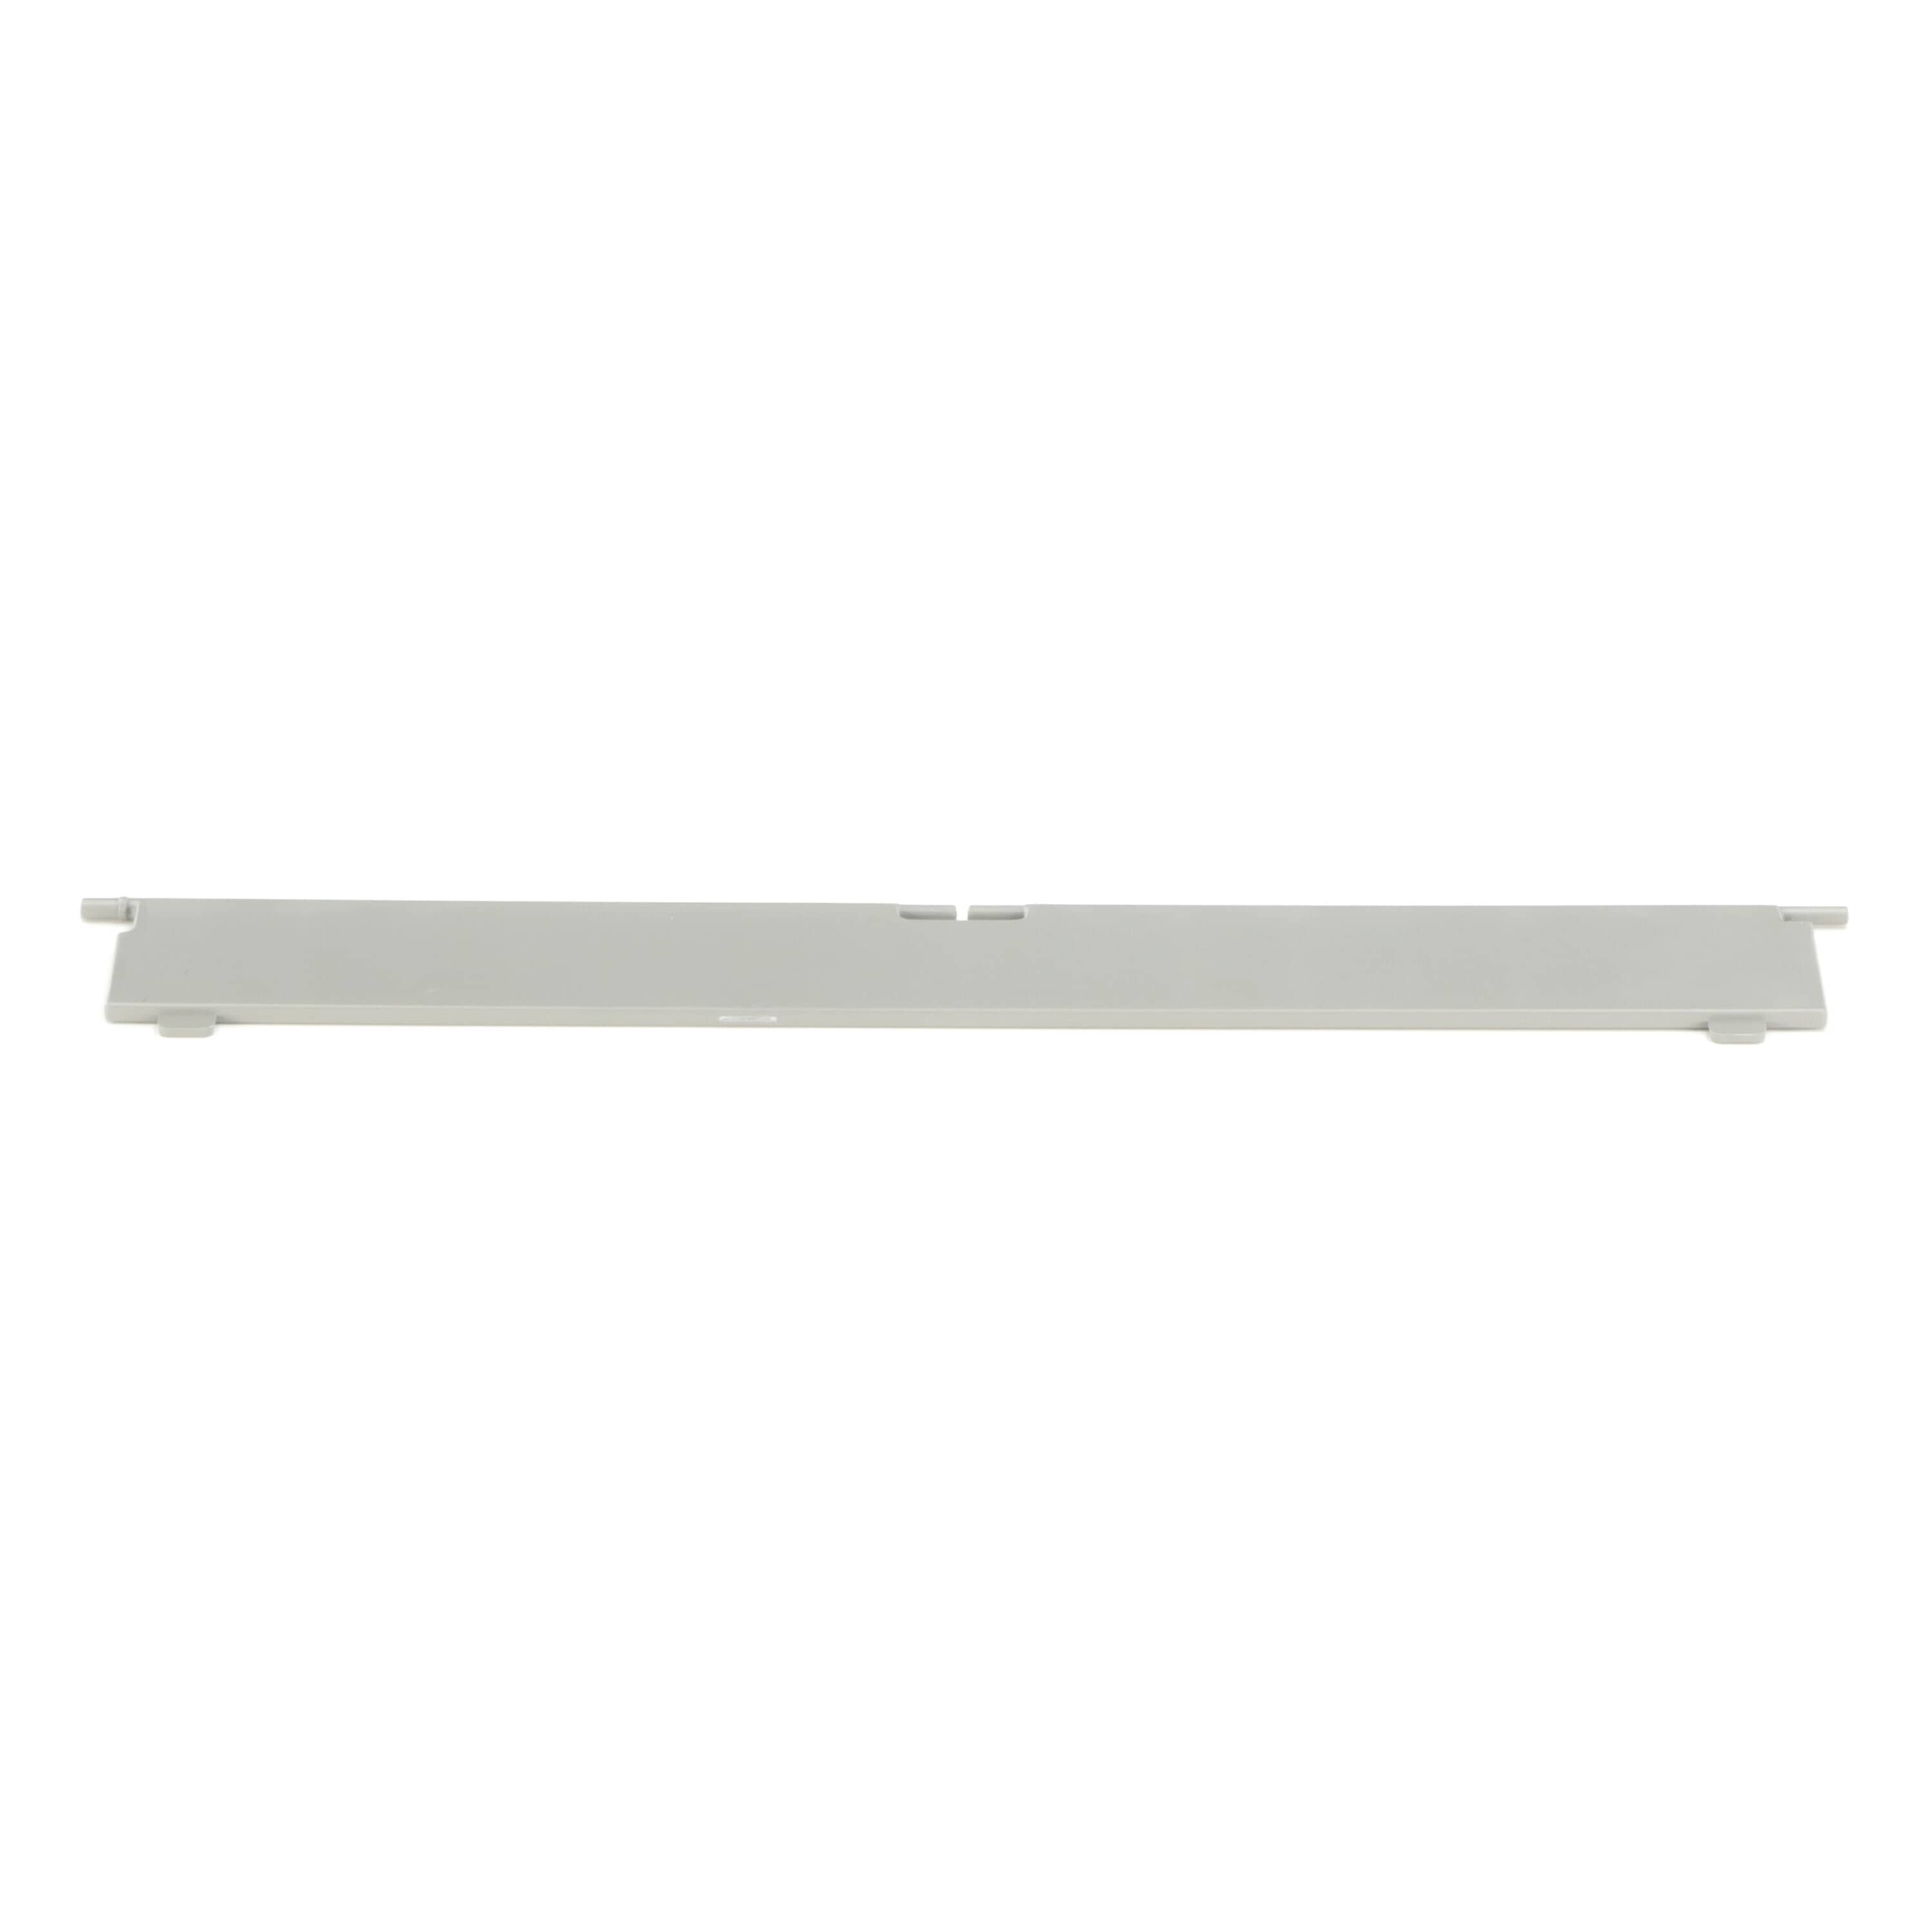 Samsung DC63-01140A Dryer Filter Cover - Samsung Parts USA